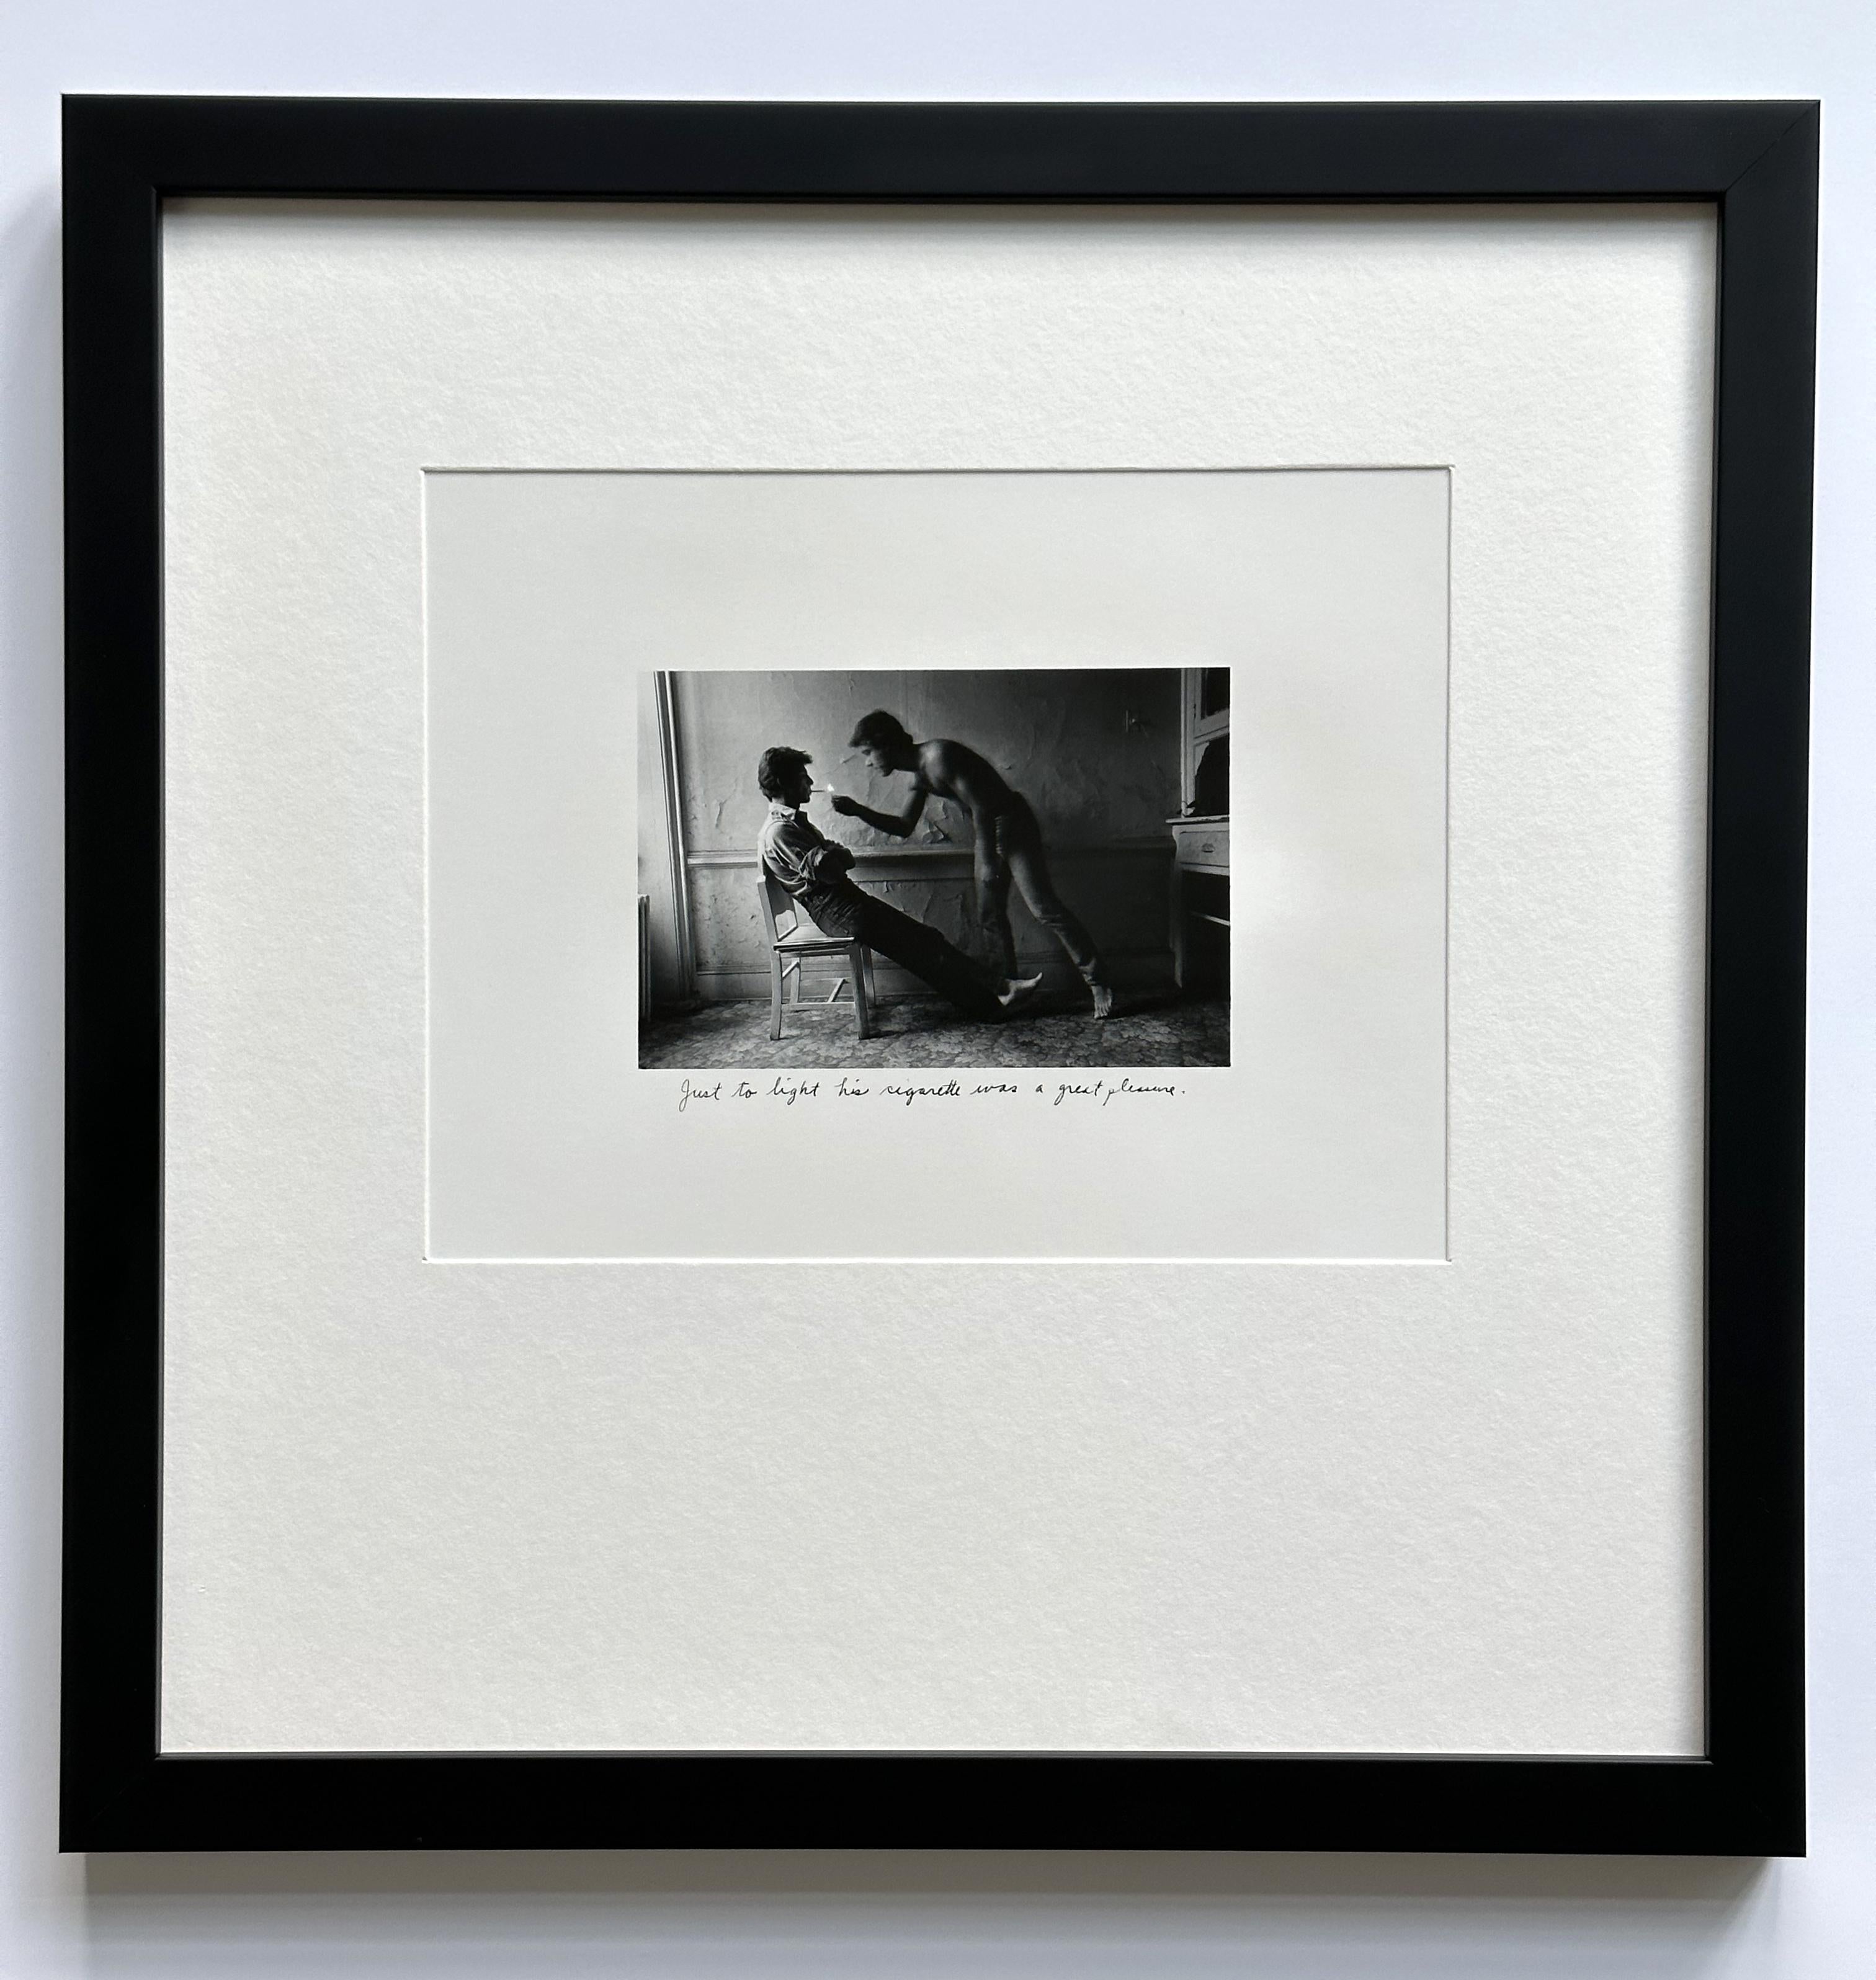 An editioned gelatin silver print by American photographer Duane Michals (1932-). 